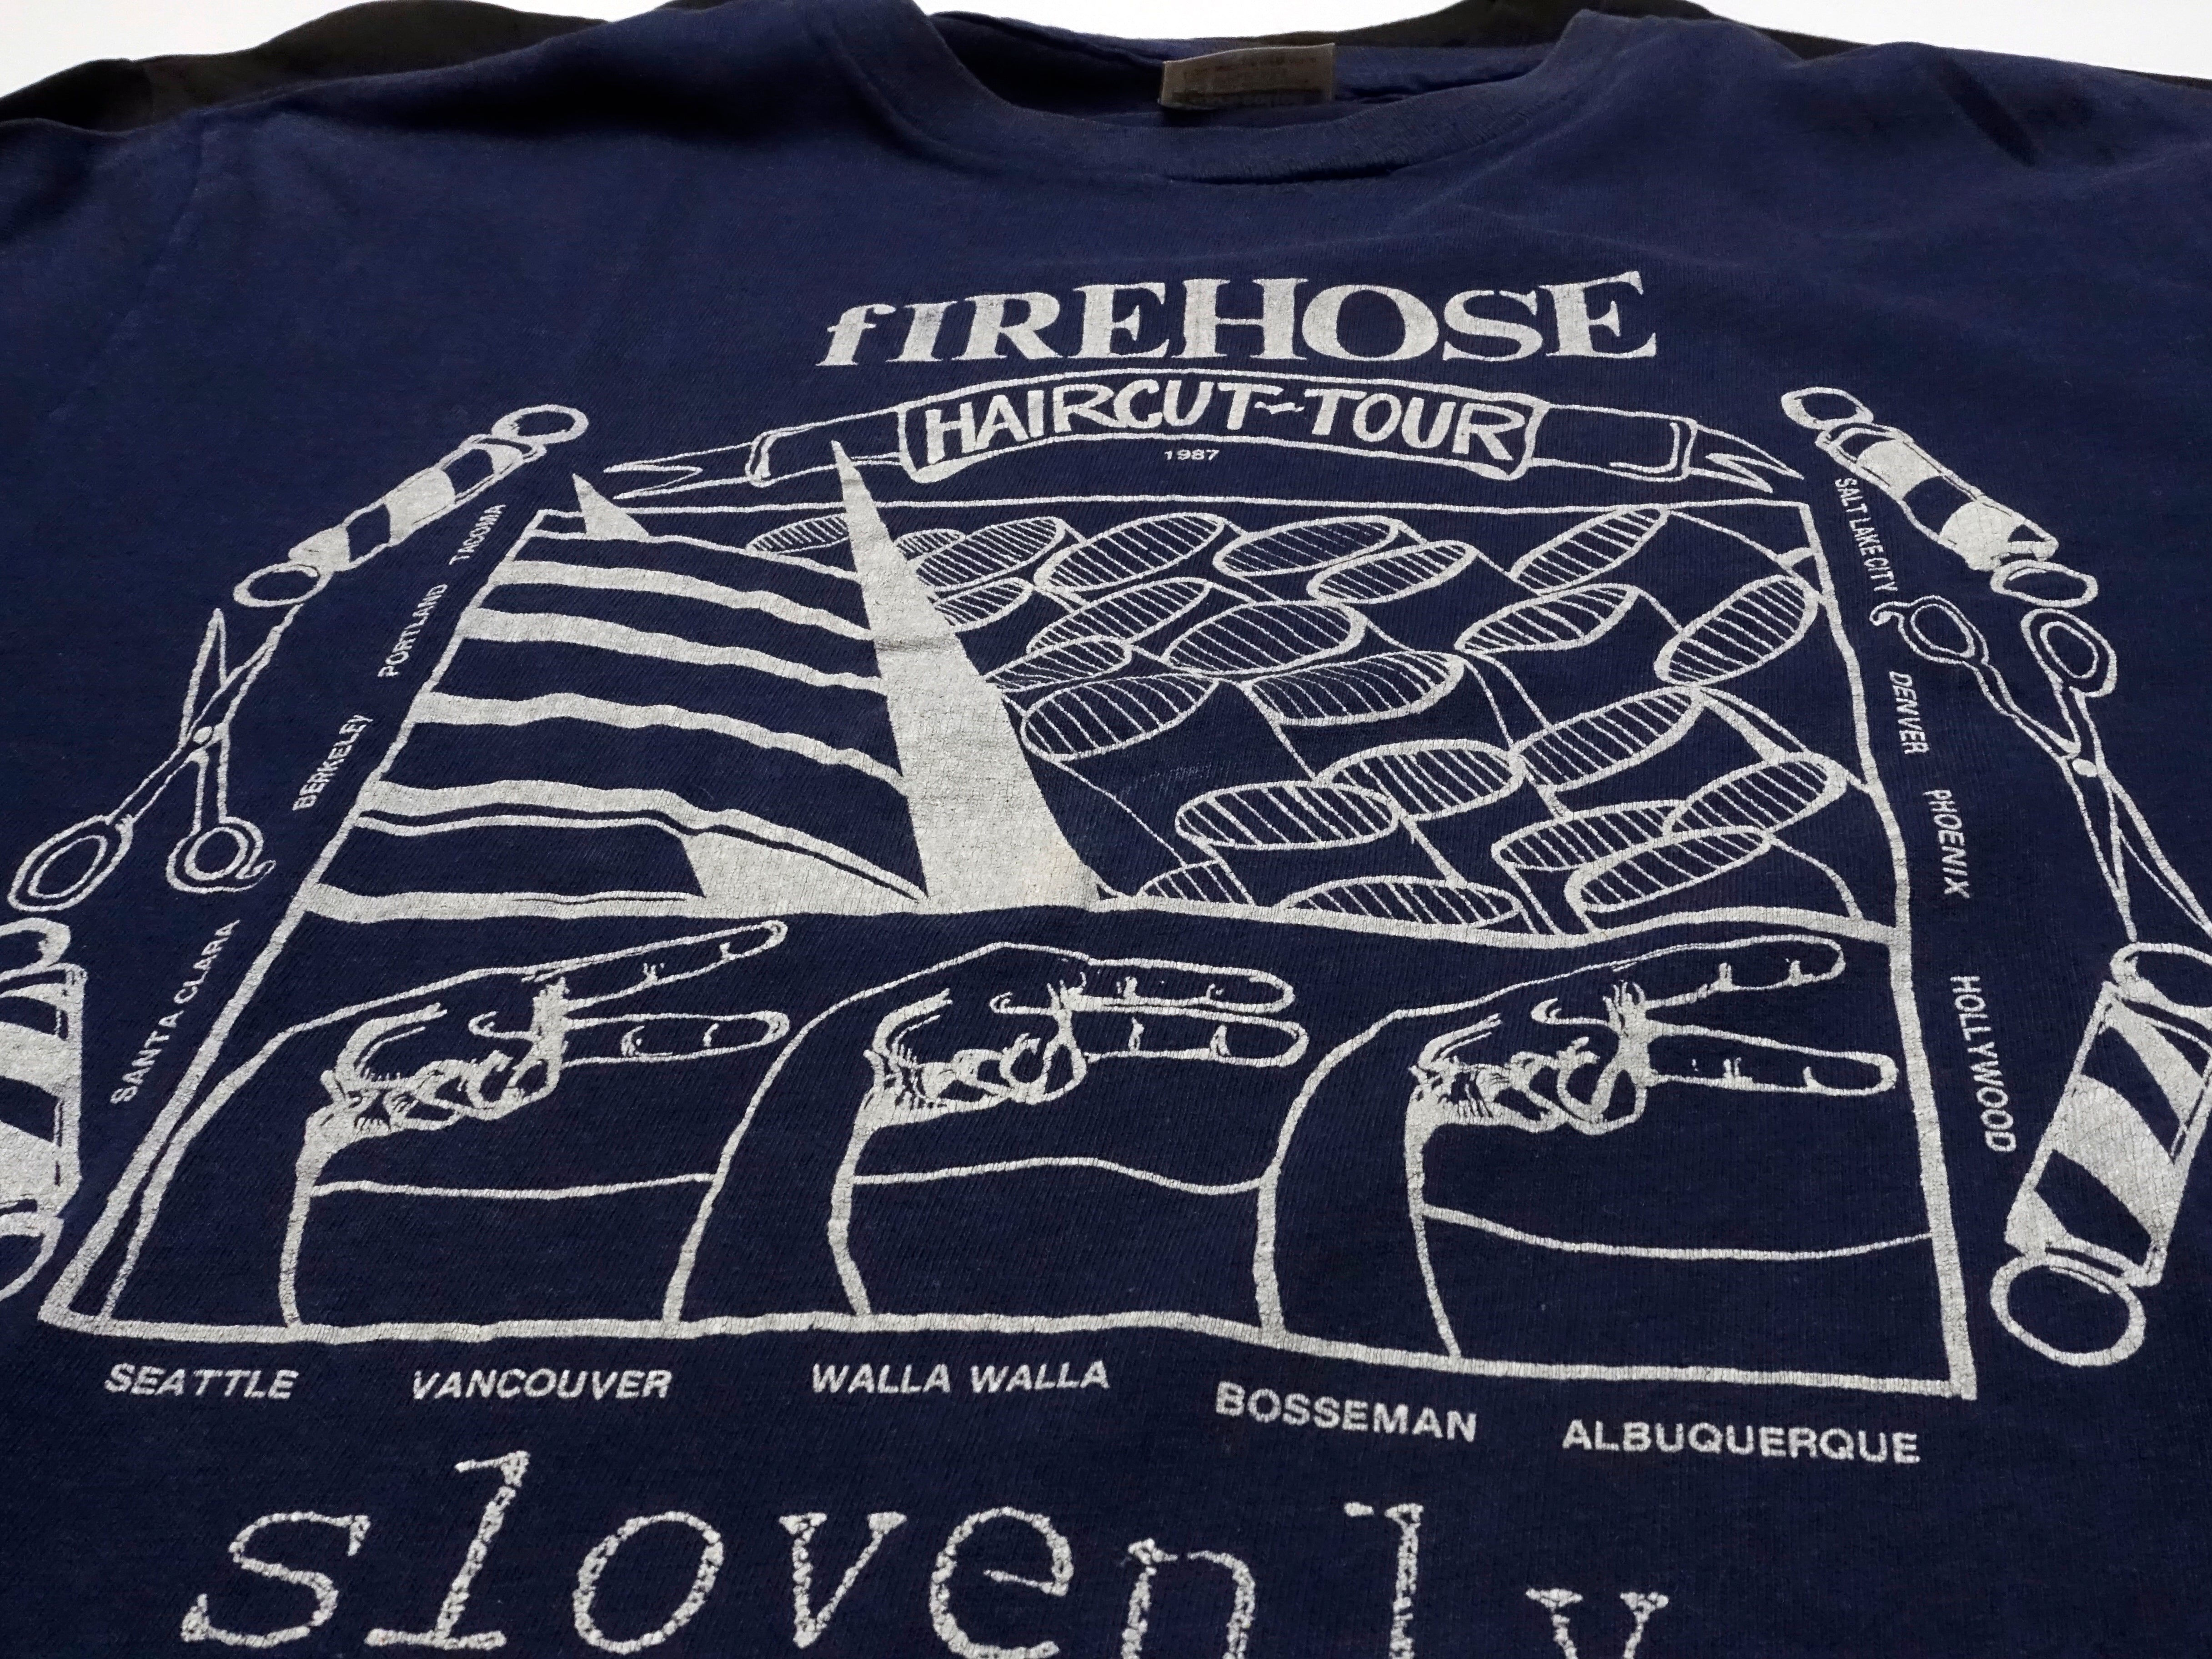 fIREHOSE / Slovenley - 1987 Haircut Tour With Slovenley Shirt Size Large / XL